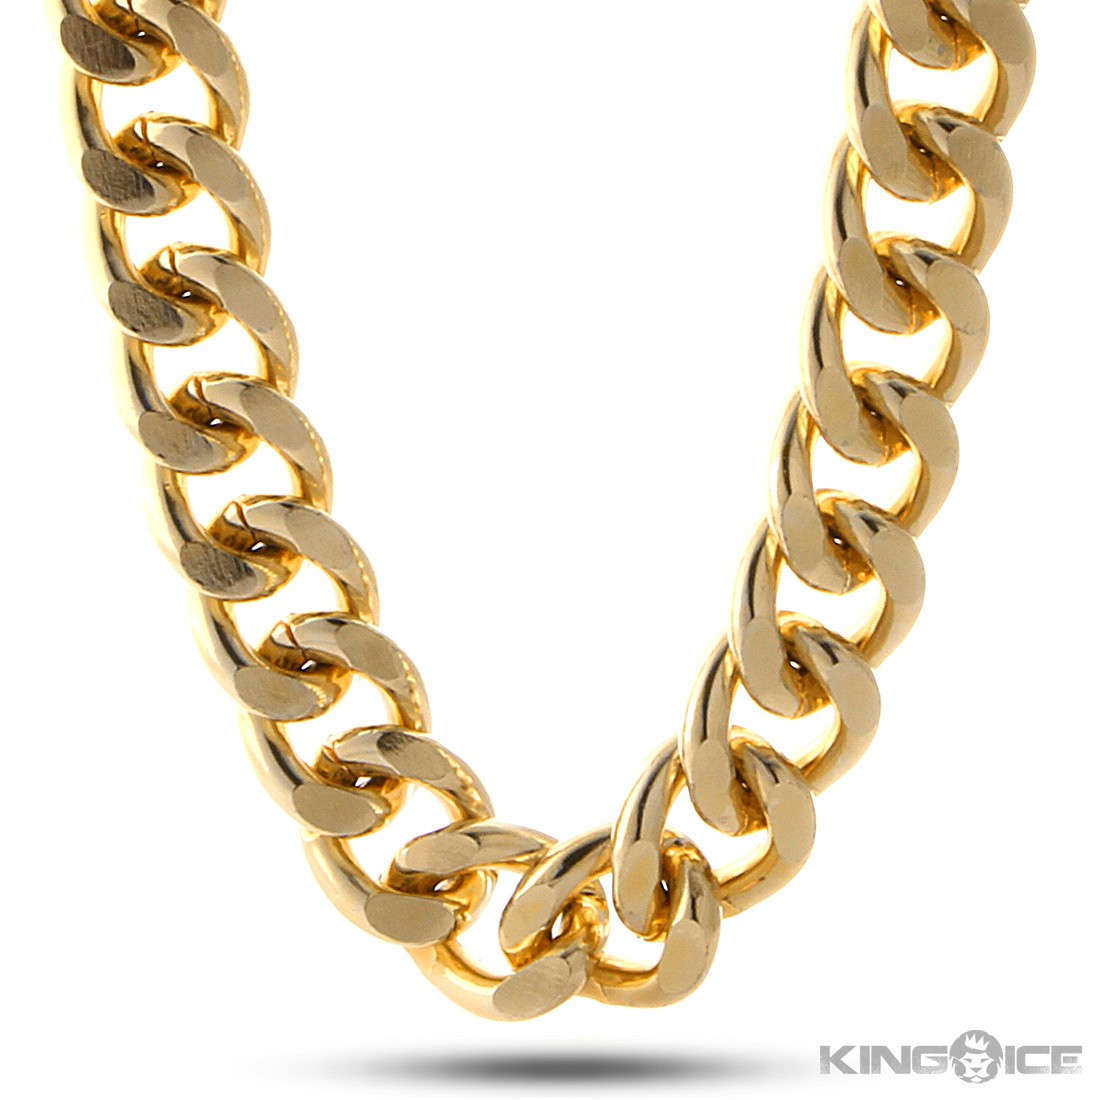 View Gold Chain Clipart Background - Alade